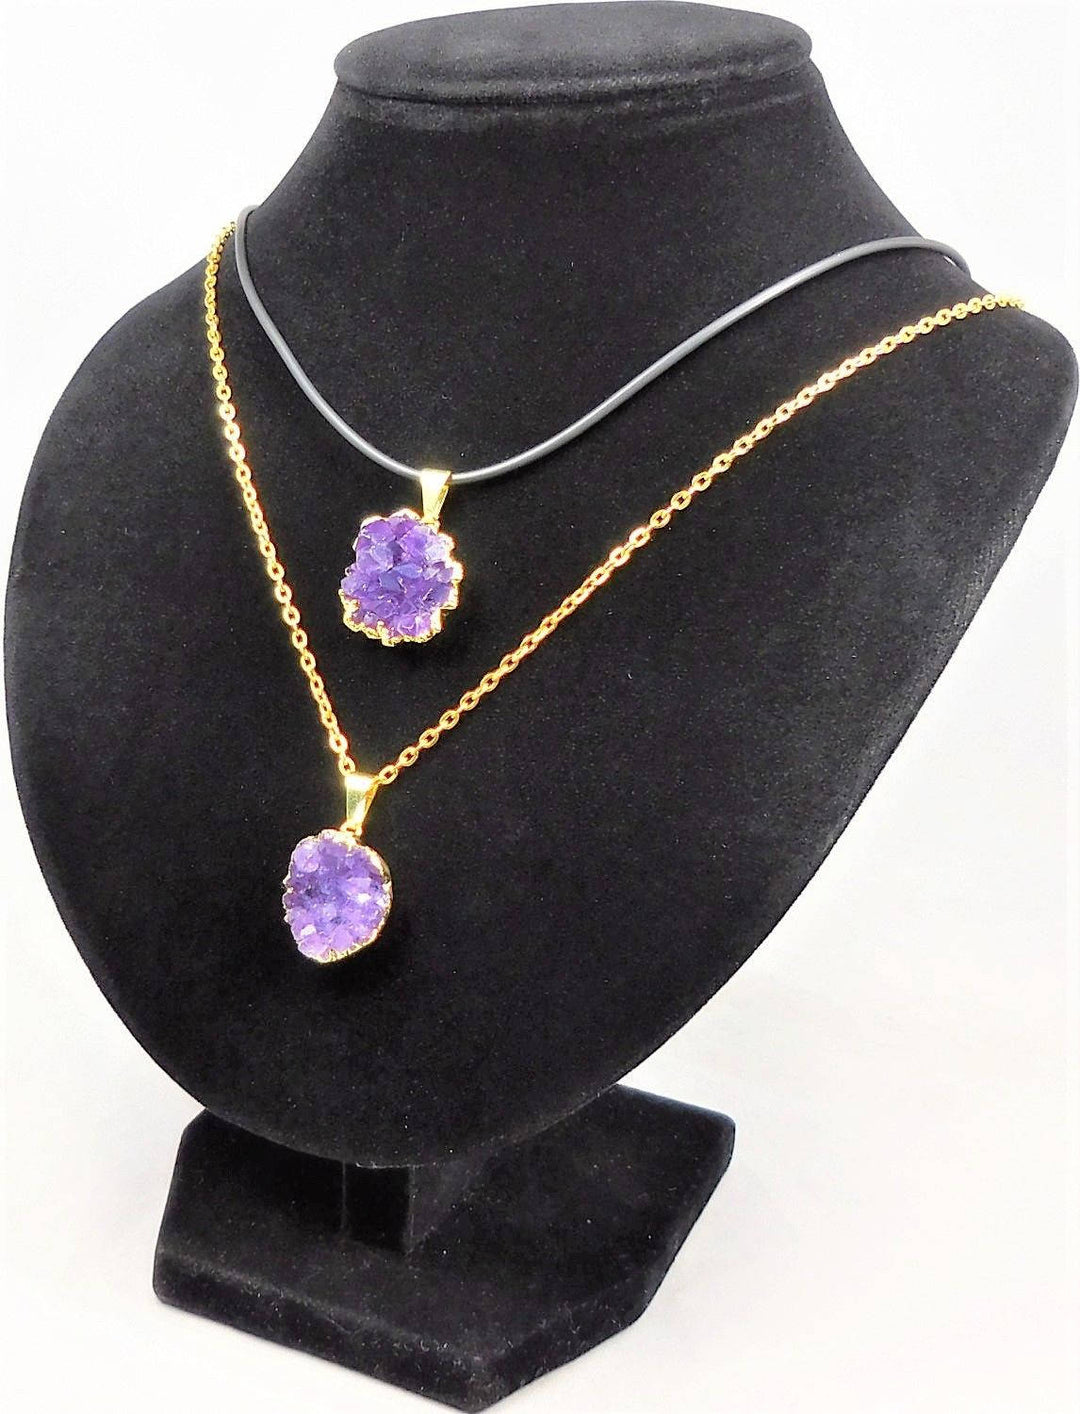 Druzy Amethyst Necklace Pendant - Petite Gold Crystal Cluster